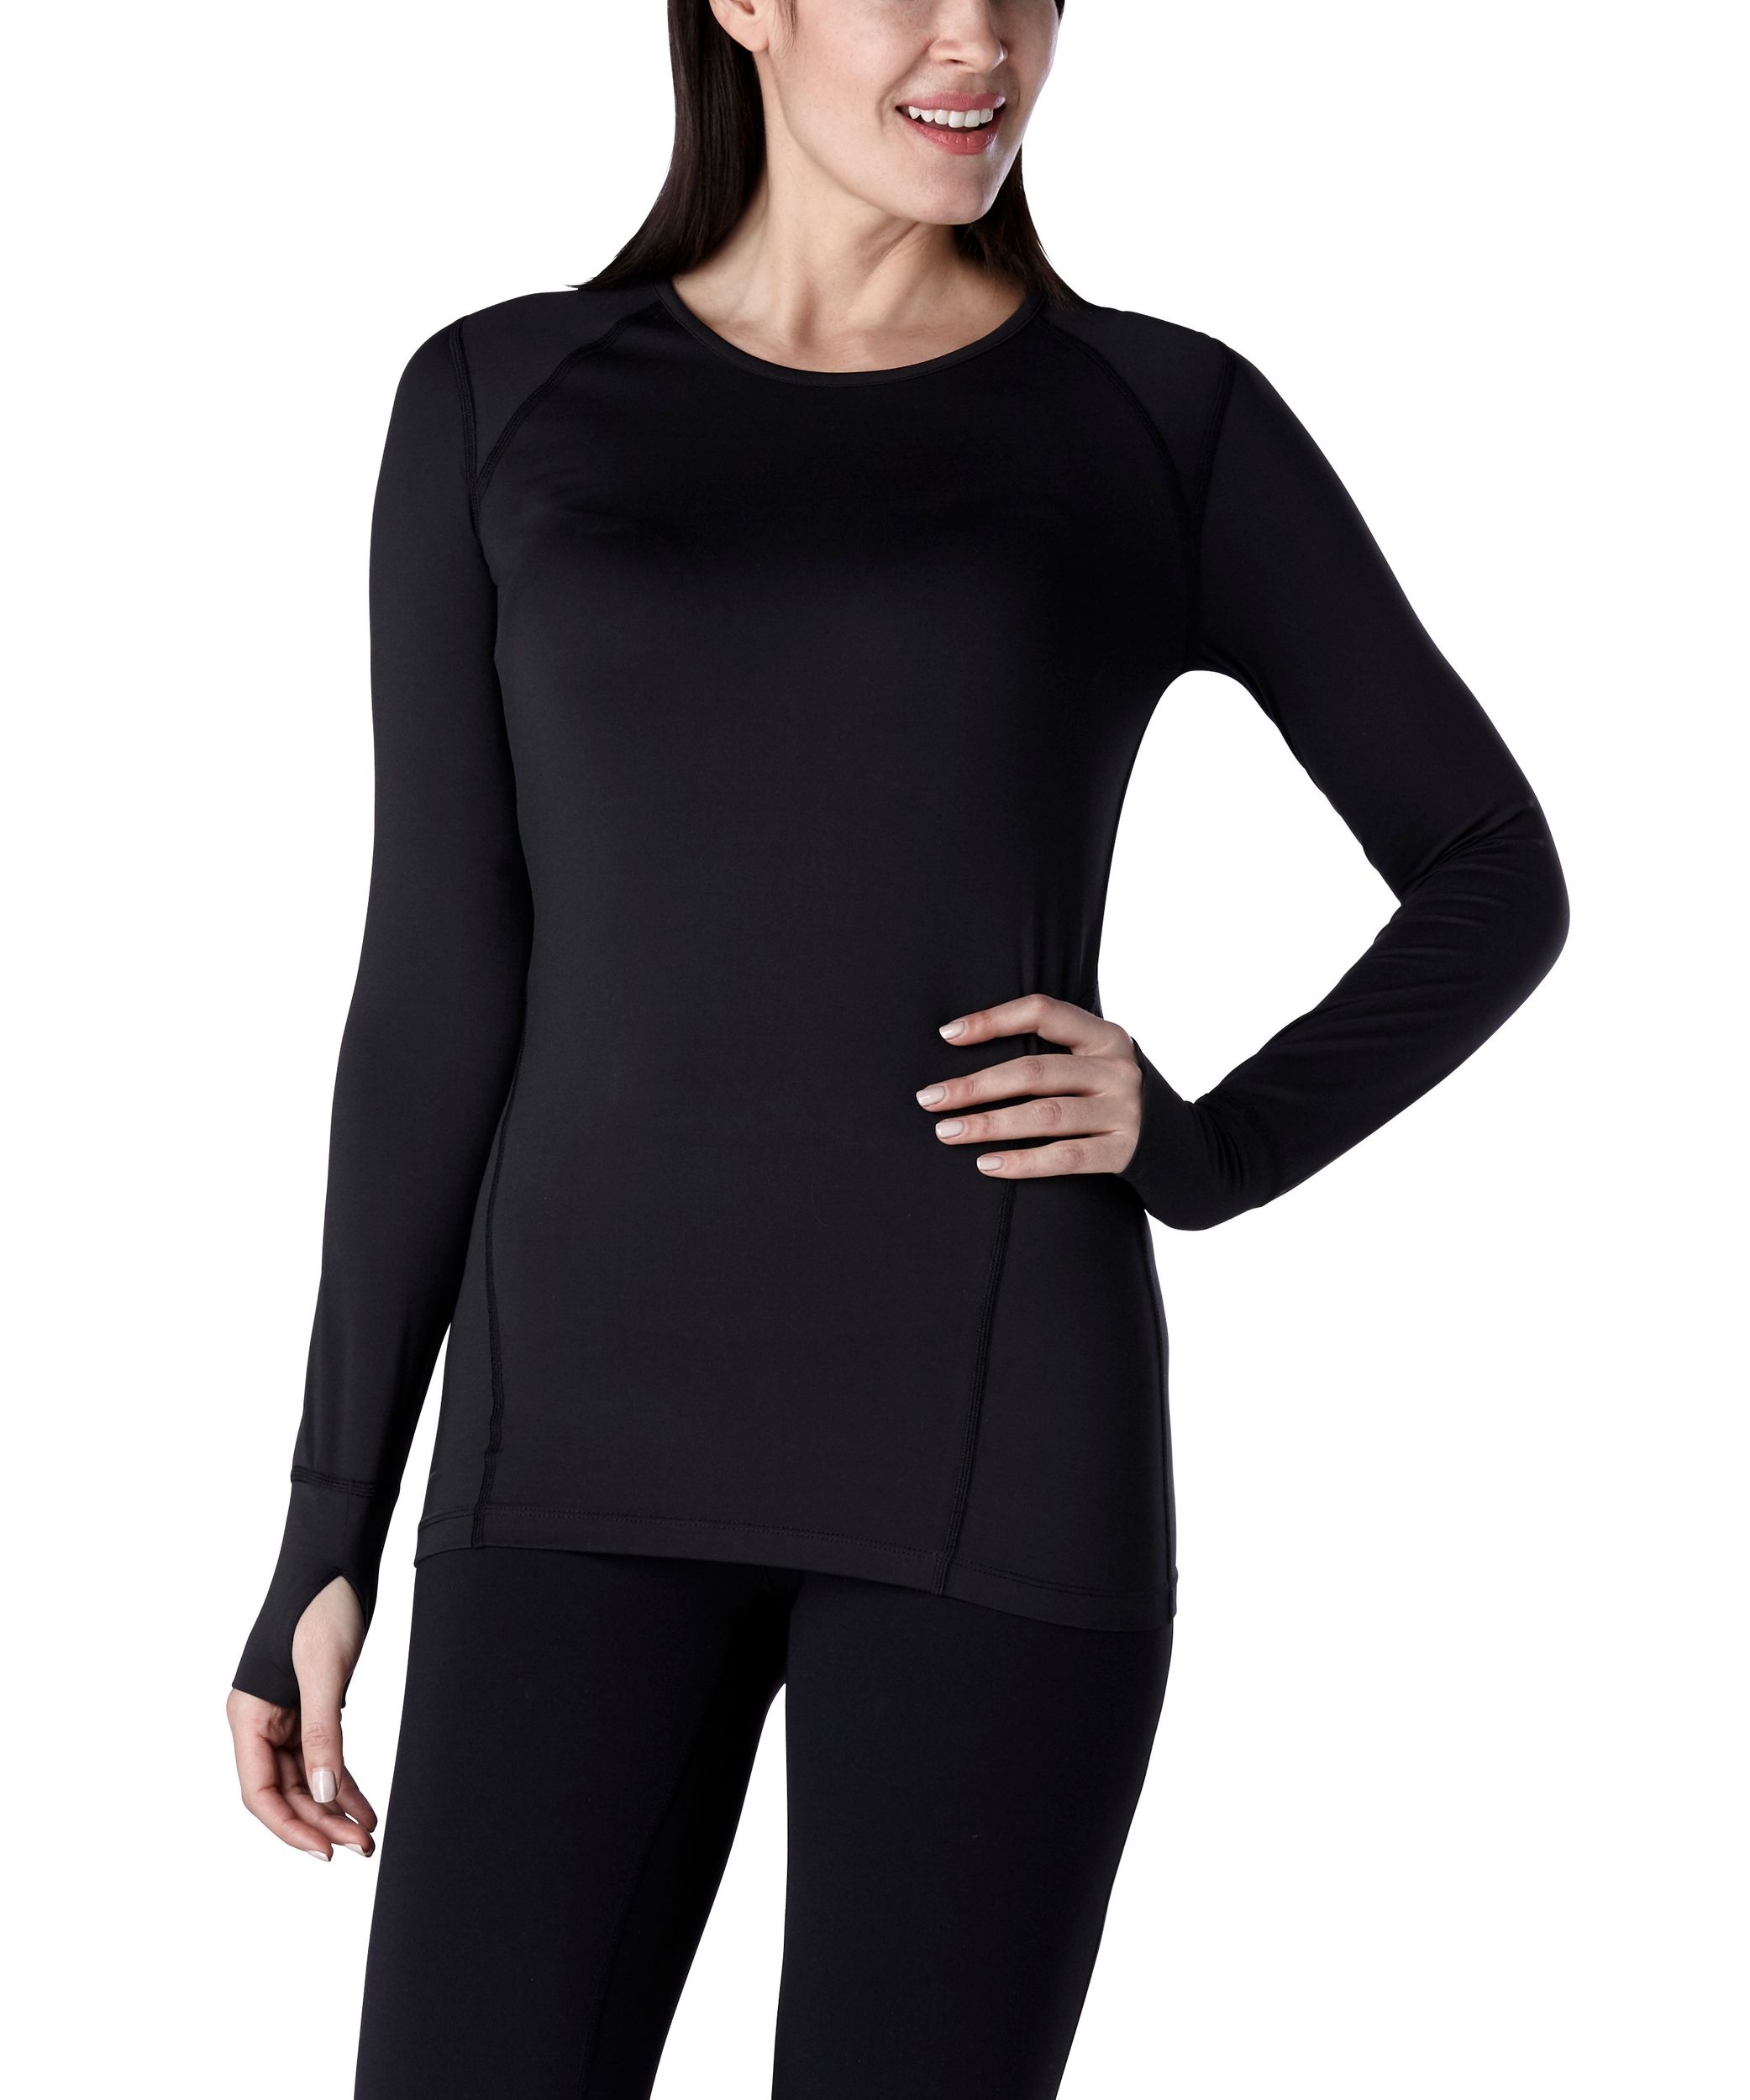 WindRiver Women's Crew Neck Long Sleeve Microfibre Thermal Top - Black ...